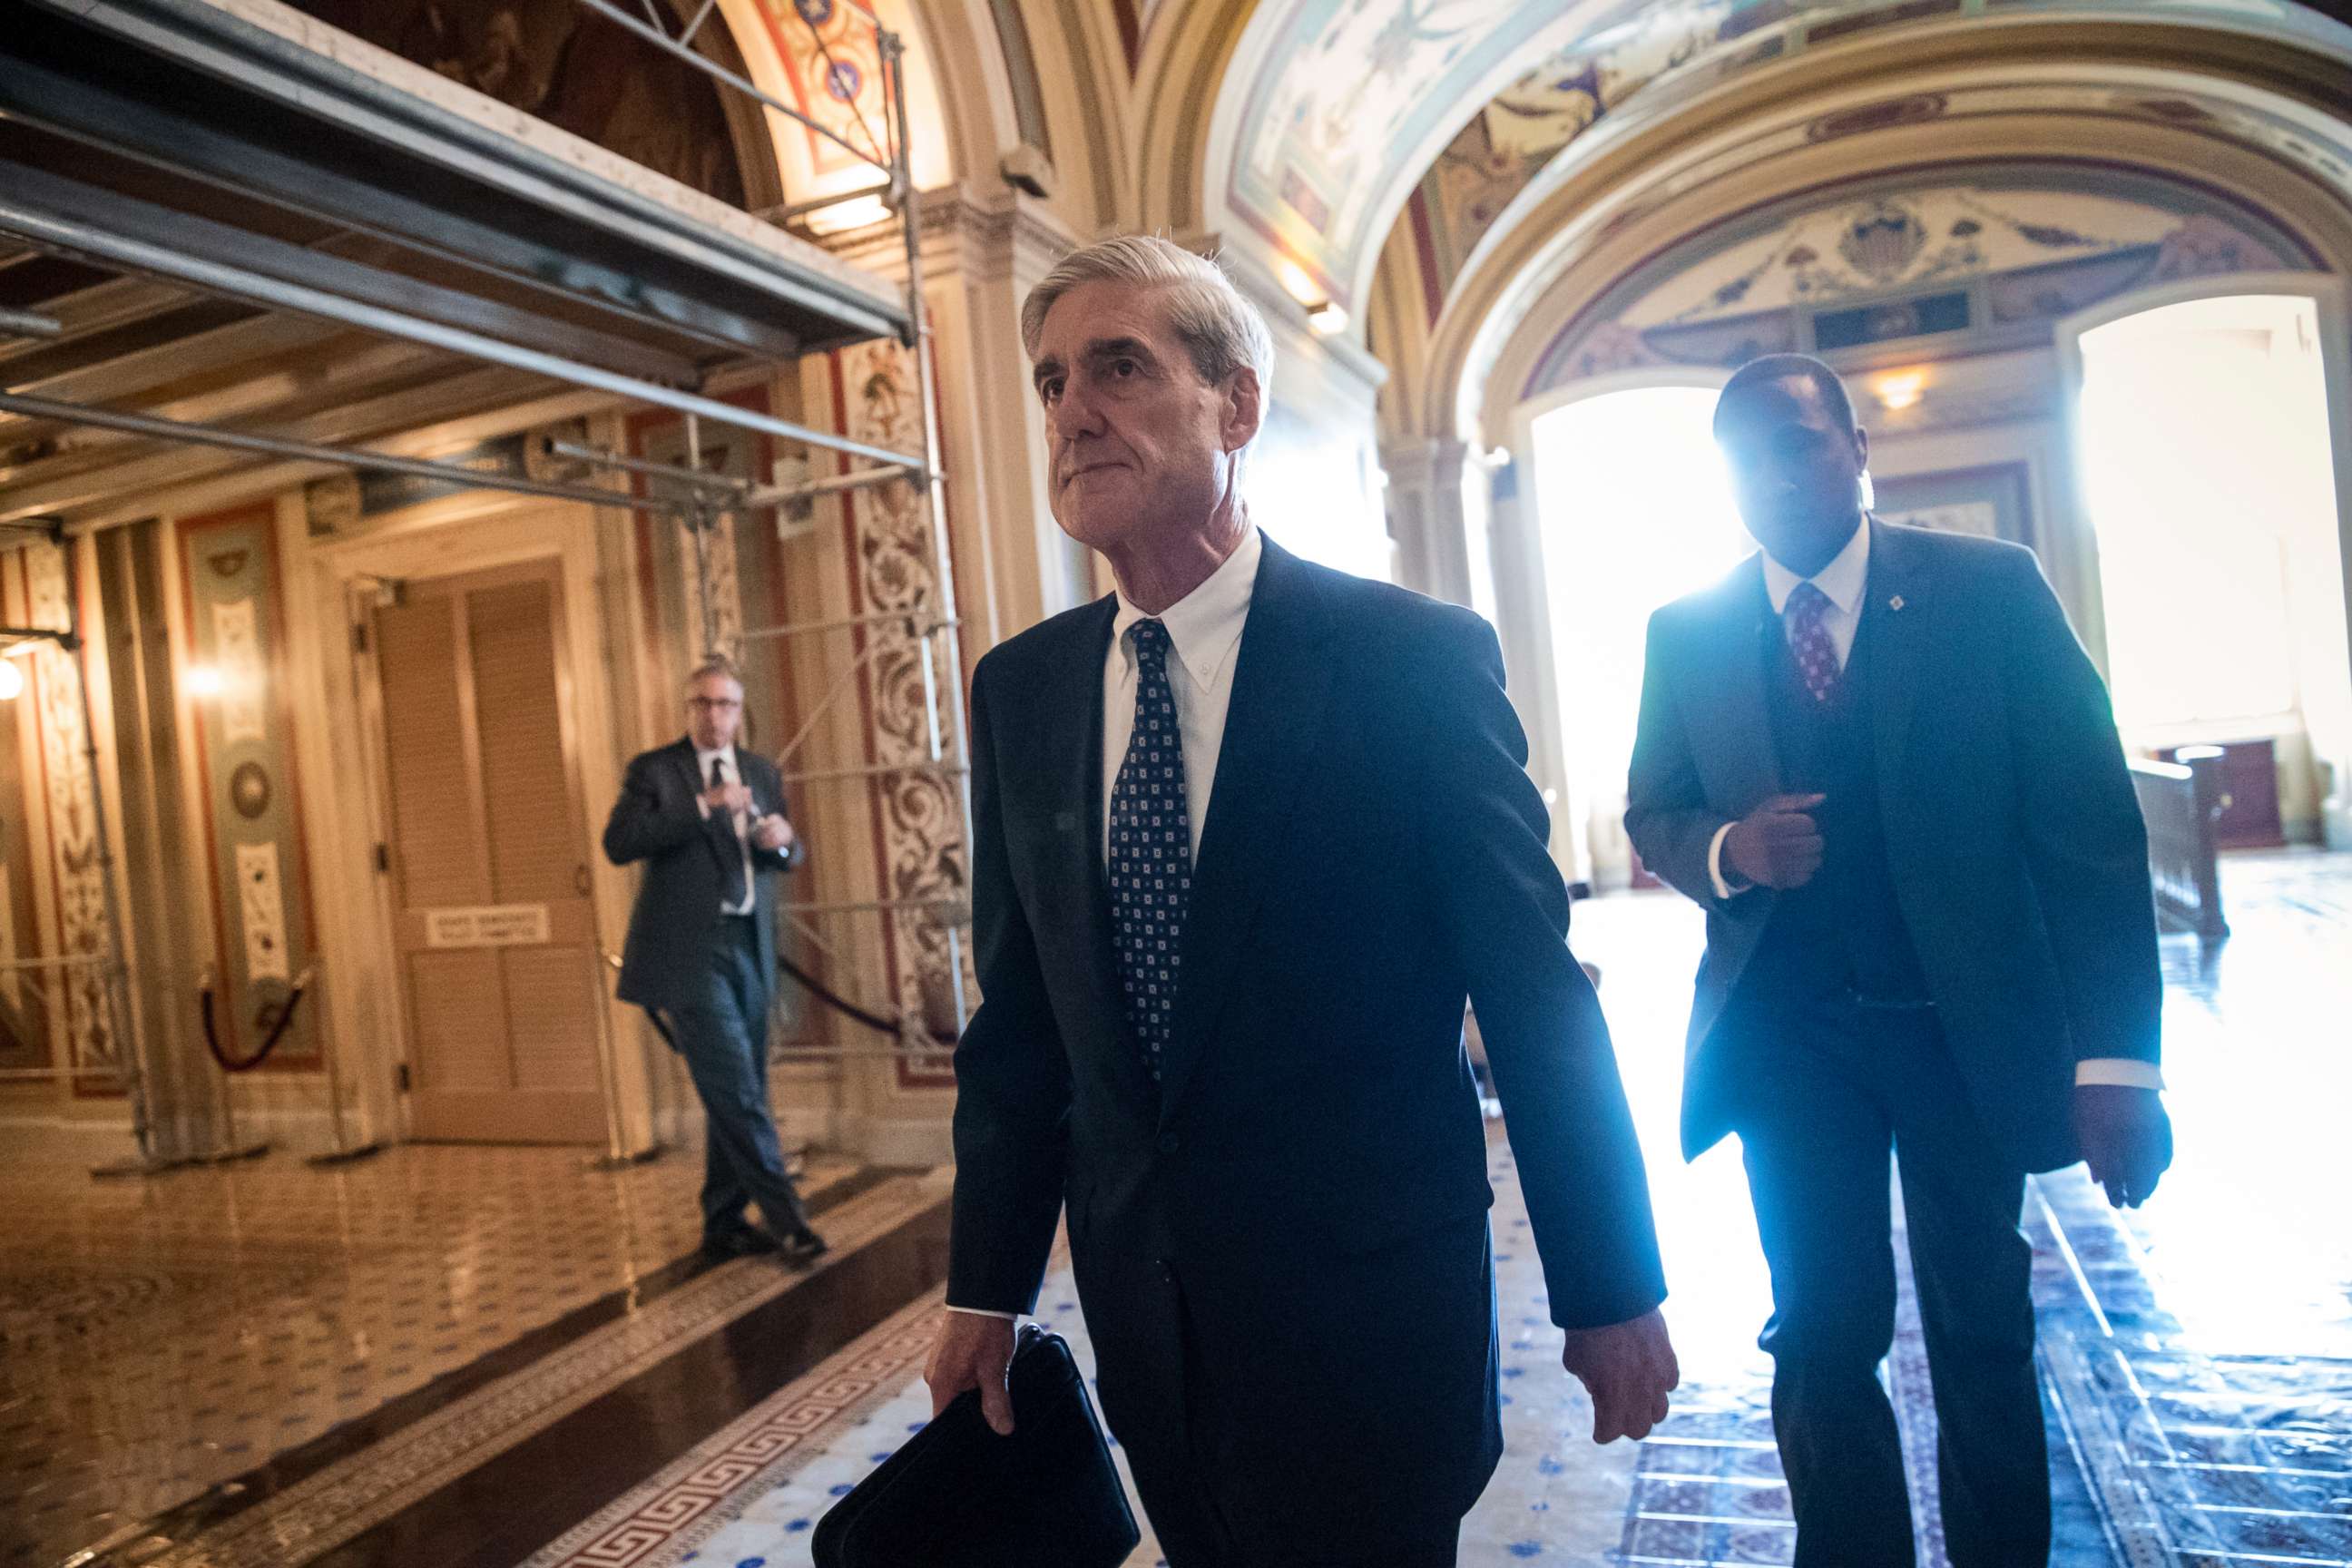 PHOTO: In this June 21, 2017, file photo, Special Counsel Robert Mueller departs after a closed-door meeting with members of the Senate Judiciary Committee about Russian meddling in the election at the Capitol in Washington.